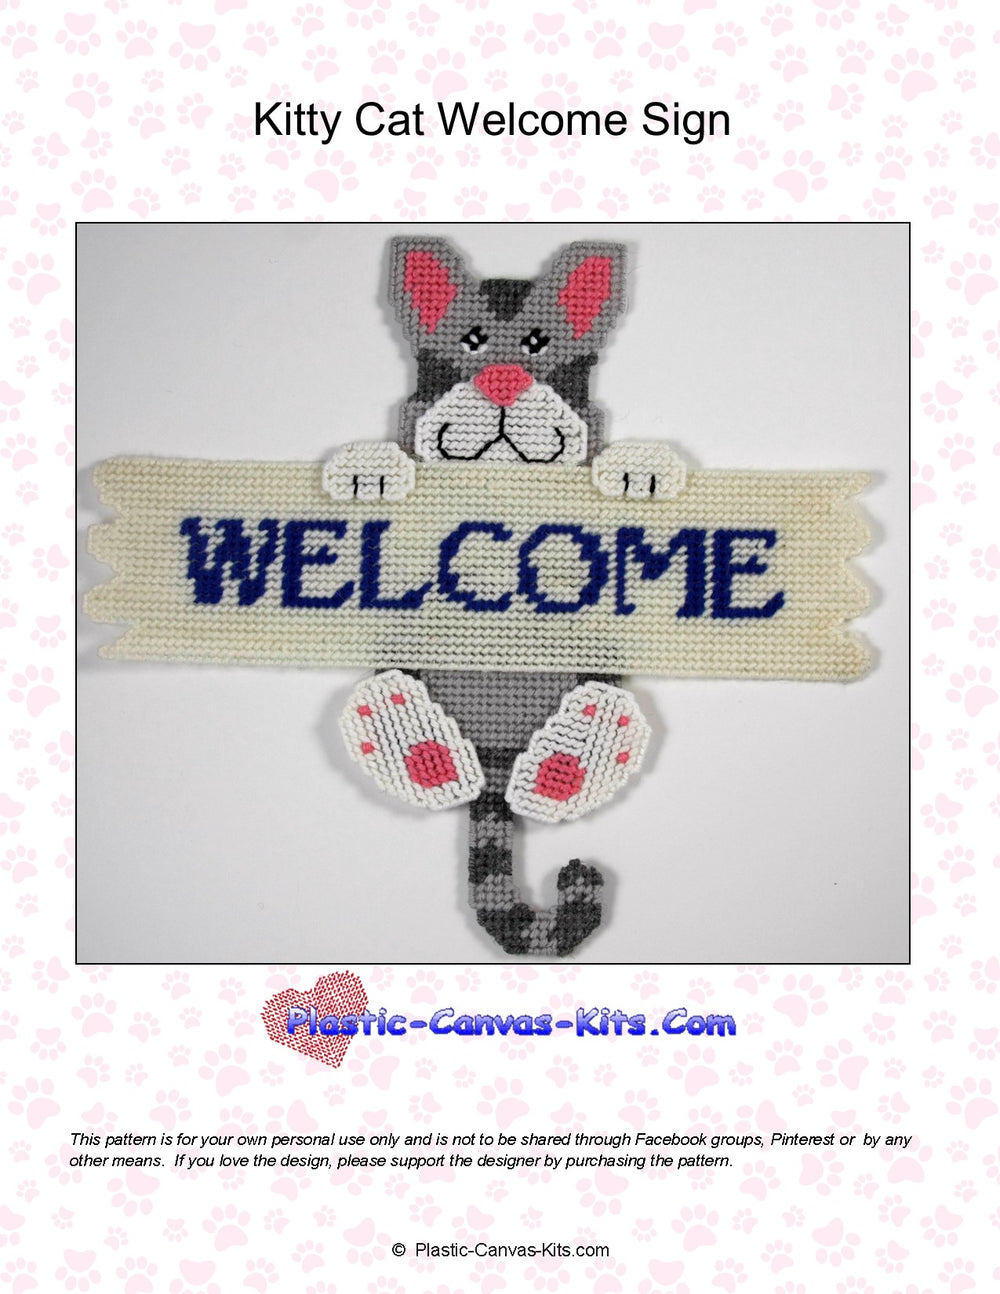 Kitty Cat Welcome Sign